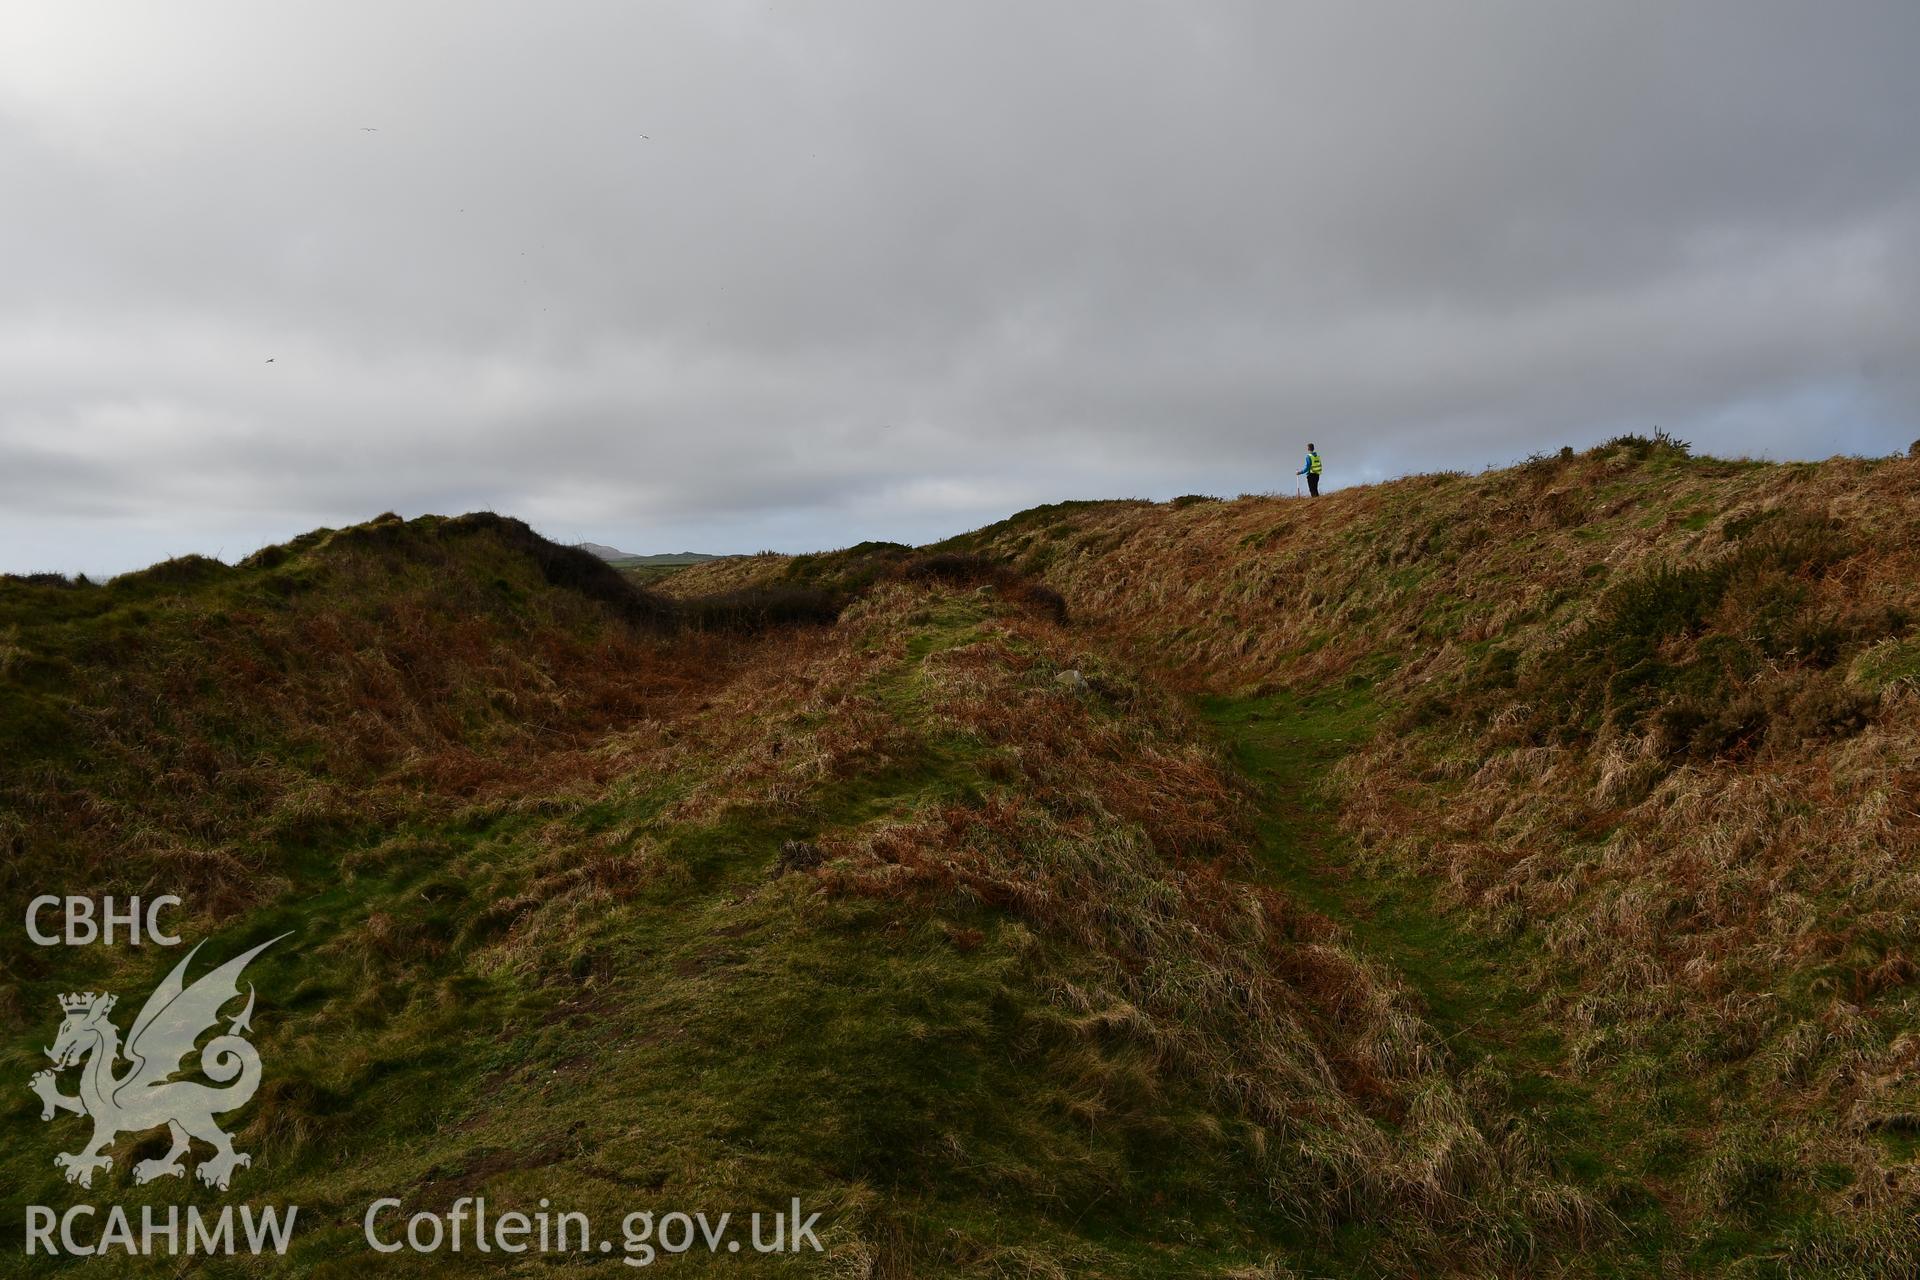 Ramparts and ditches. Person and 1m scale. Camera facing W. Taken by Hannah Genders Boyd. Produced with EU funds through the Ireland Wales Co-operation Programme 2014-2023. All material made freely available through the Open Government Licence.